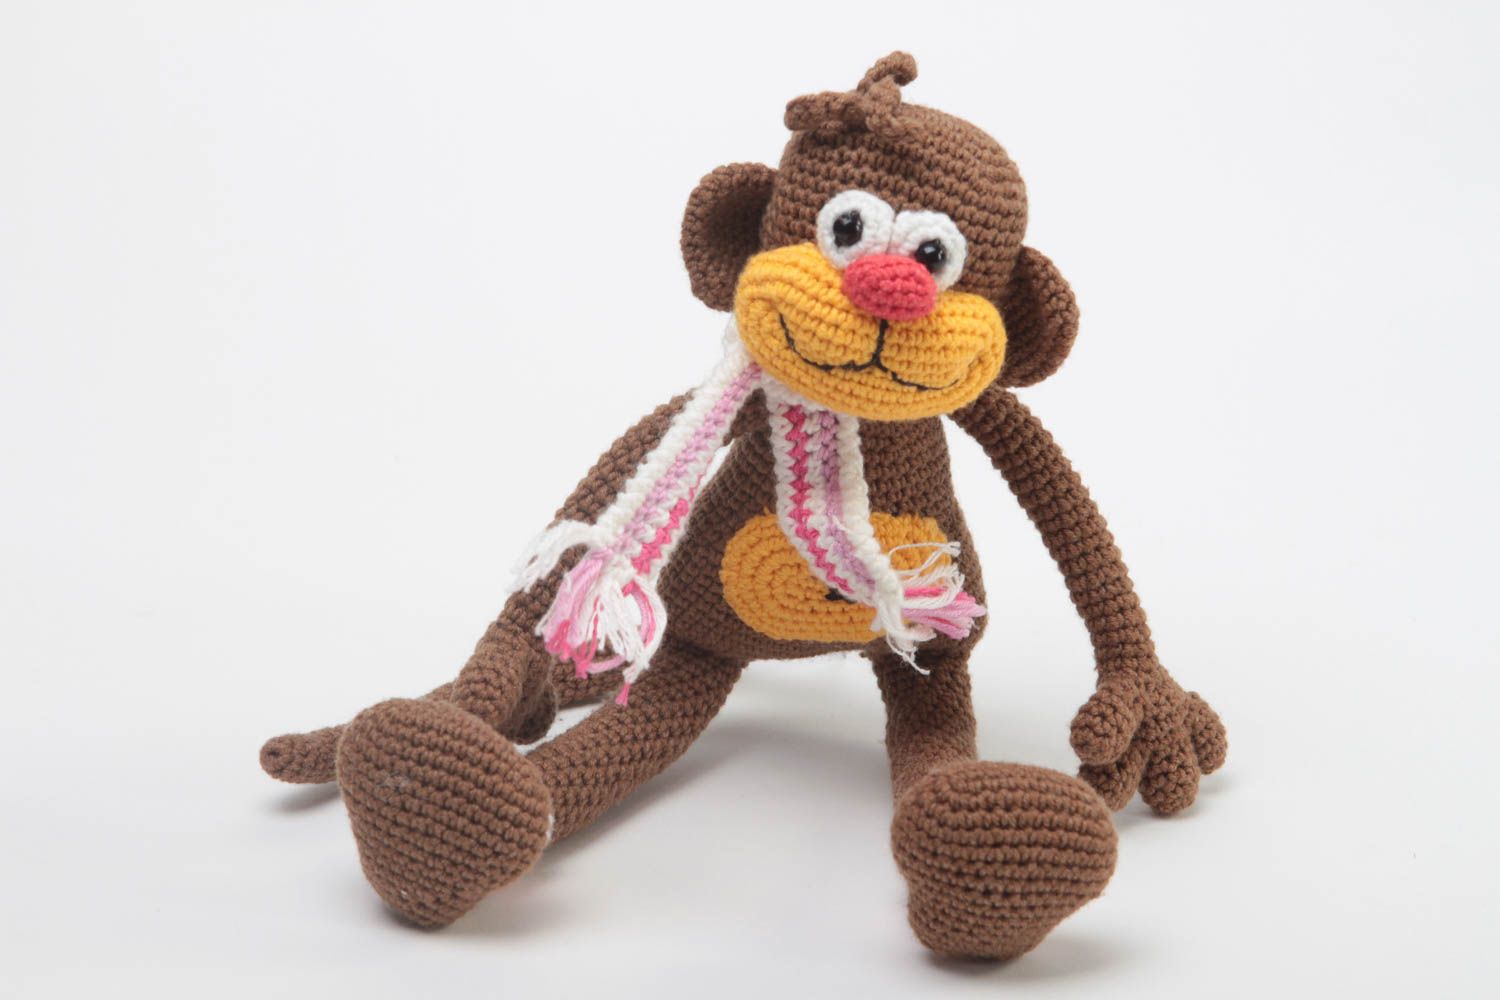 Cute handmade childrens toys crochet soft toy stuffed monkey toy gifts for kids photo 2